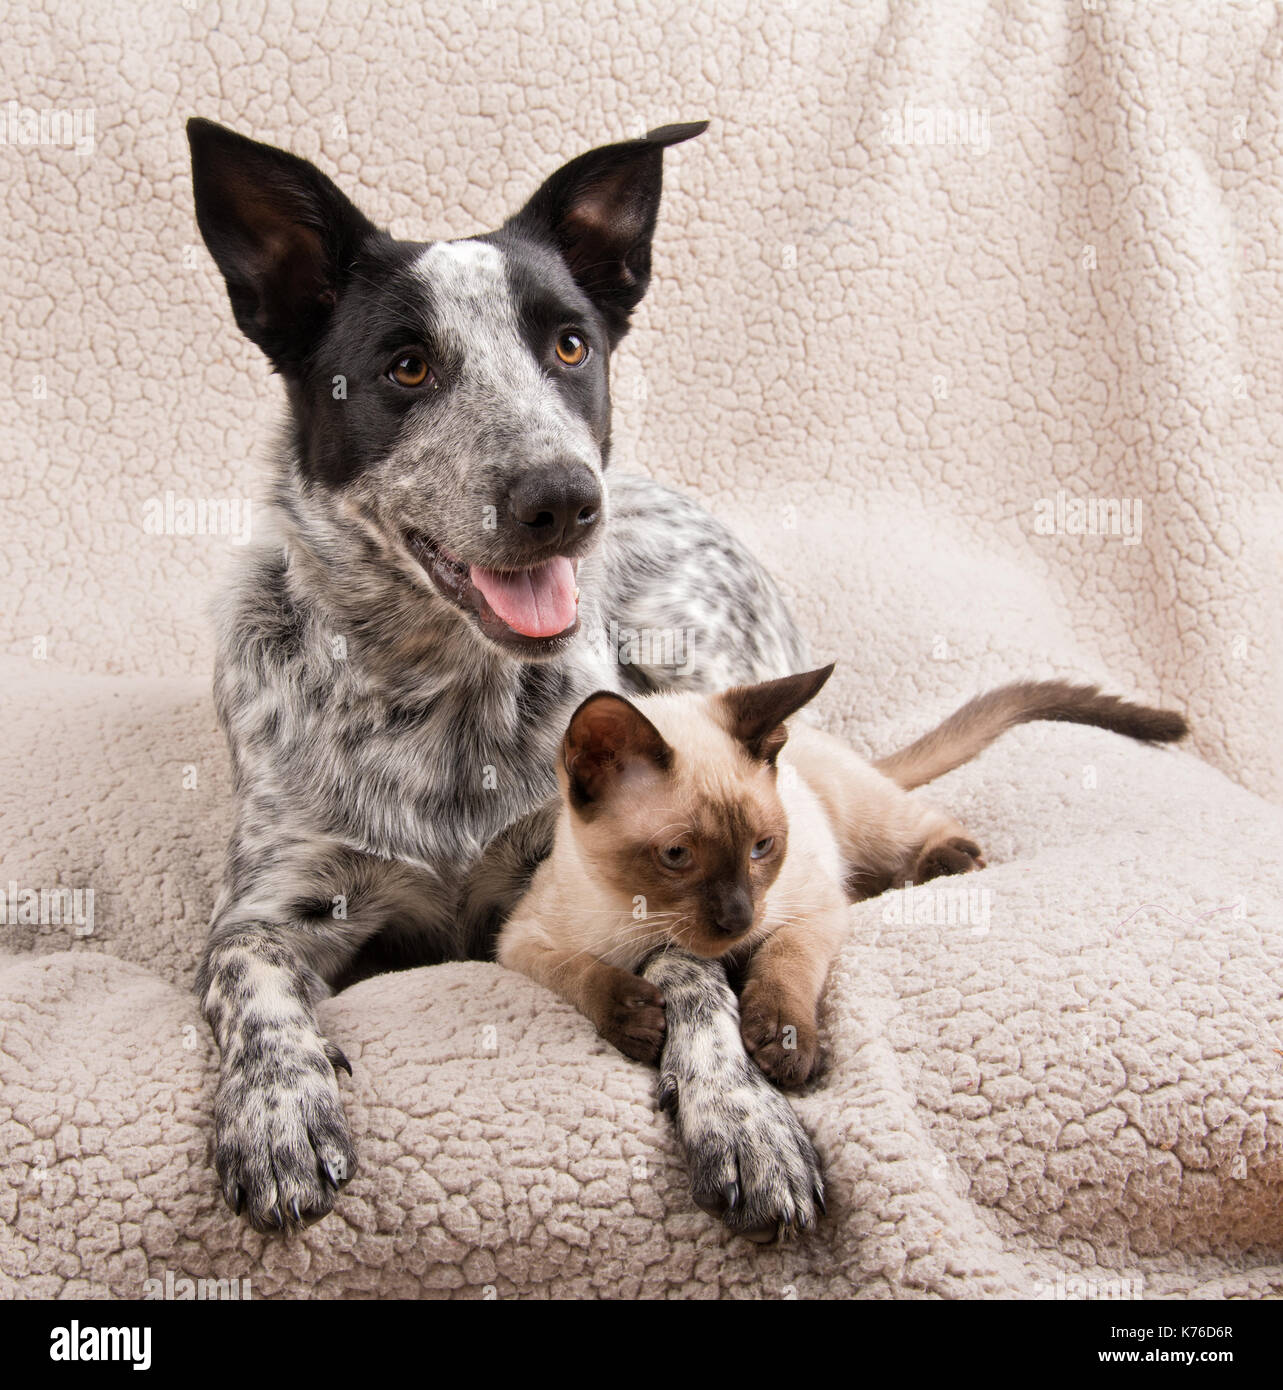 Texas heeler dog and a young Siamese cat lying together on a soft blanket Stock Photo